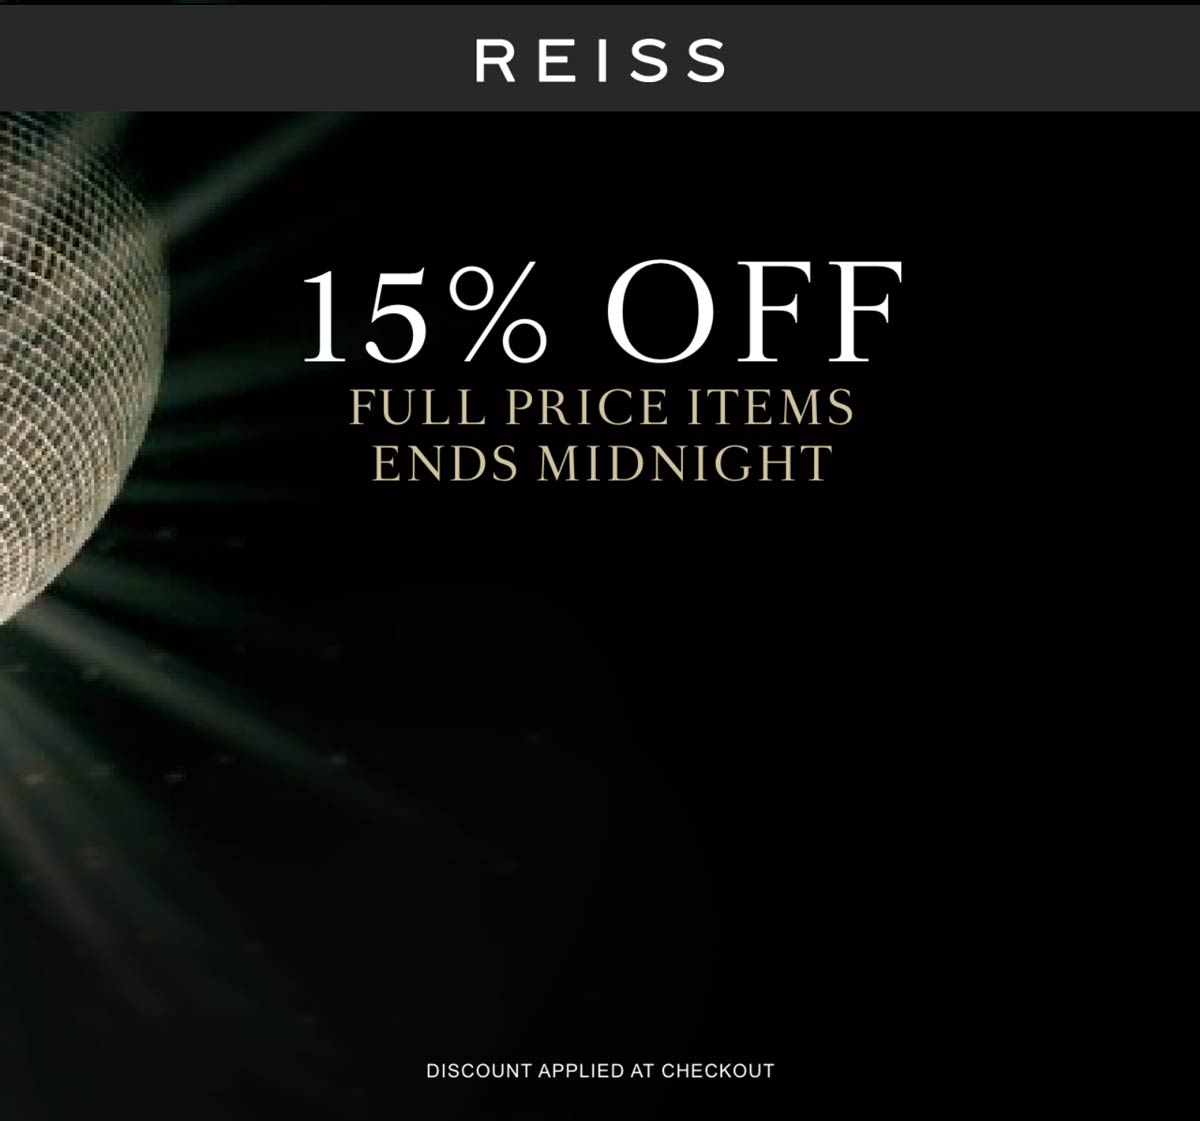 Reiss coupons & promo code for [December 2022]